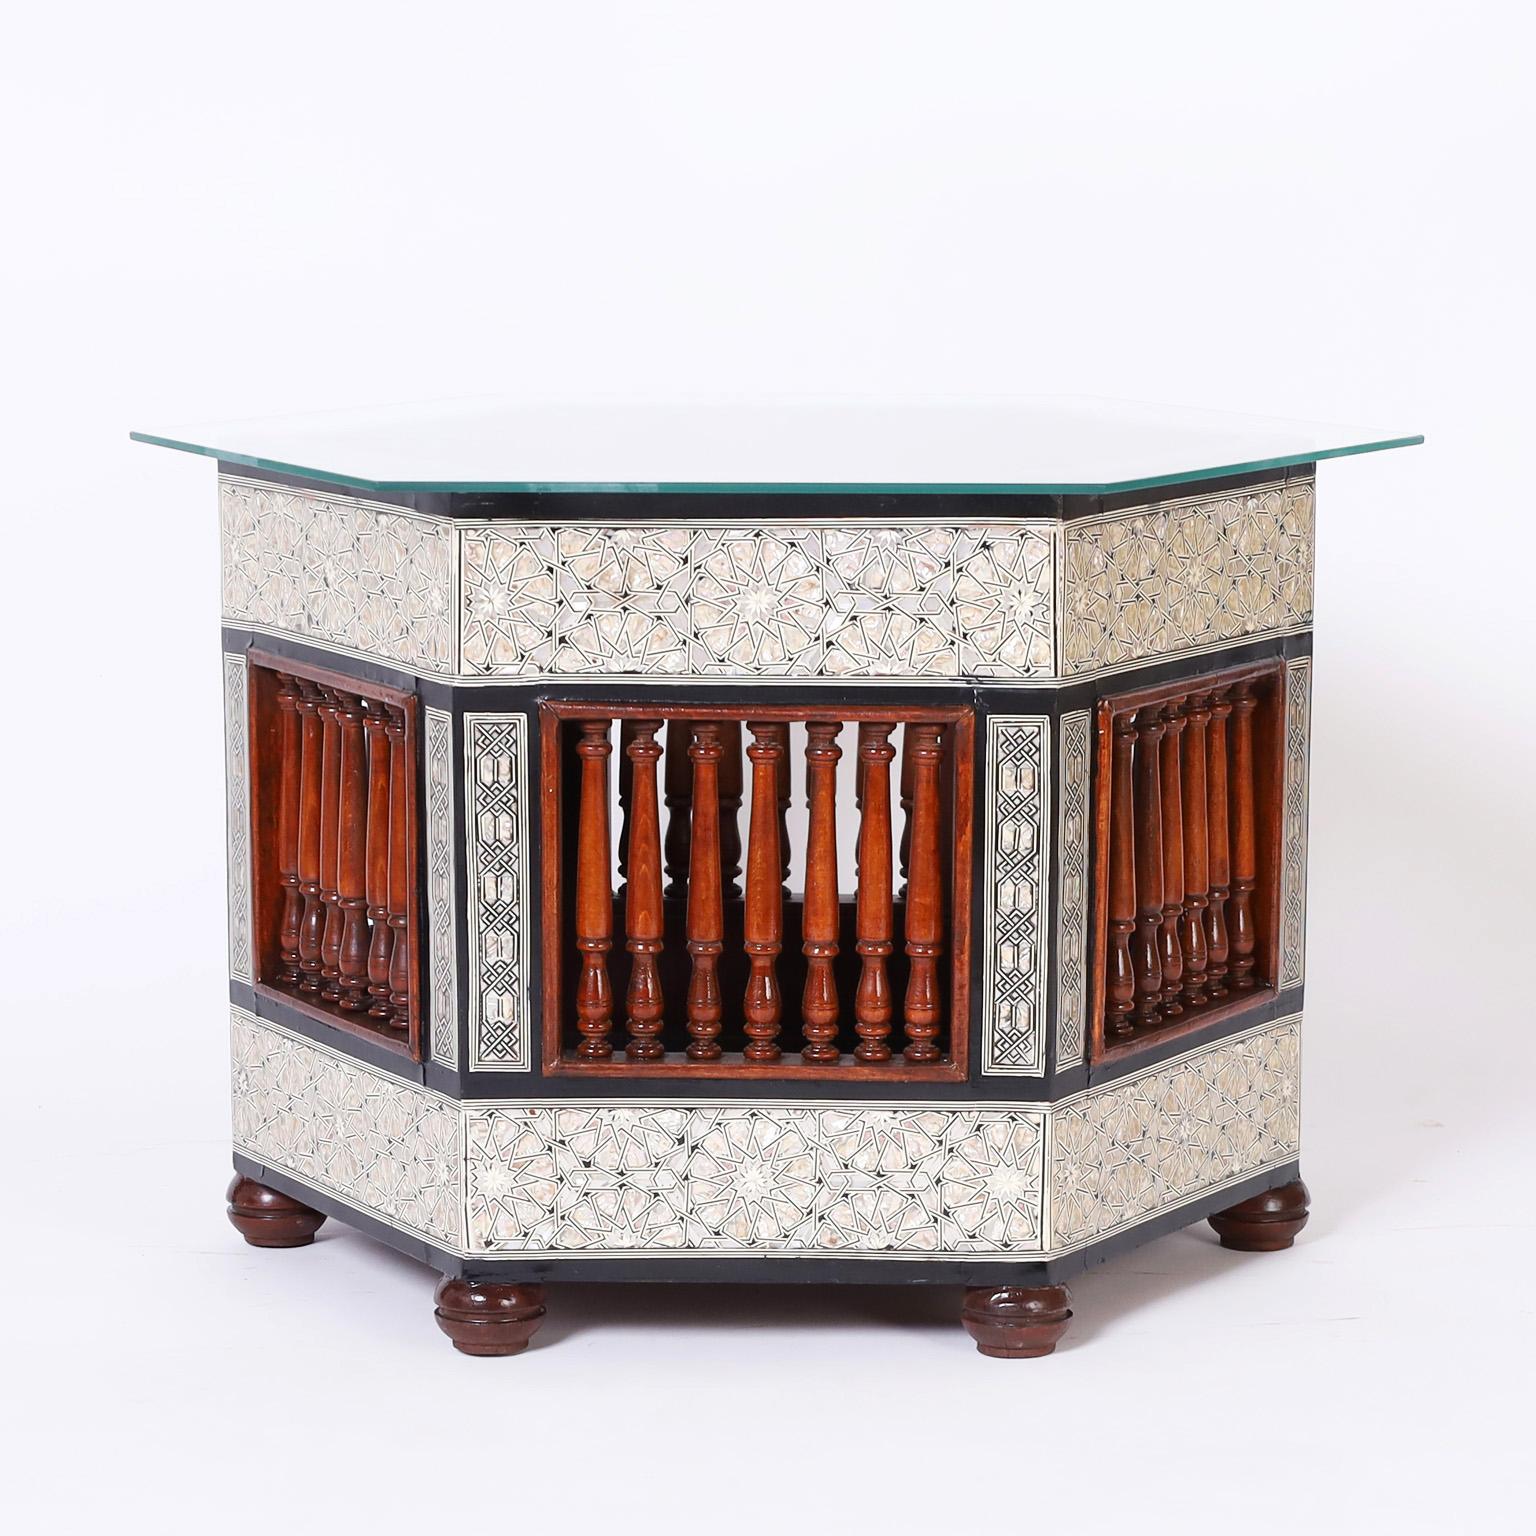 Pair of near eastern tables or stands crafted in indigenous hardwoods, once planters now tables featuring elaborate inlaid mother of pearl and ebony in geometric designs and turned mahogany balustrades.